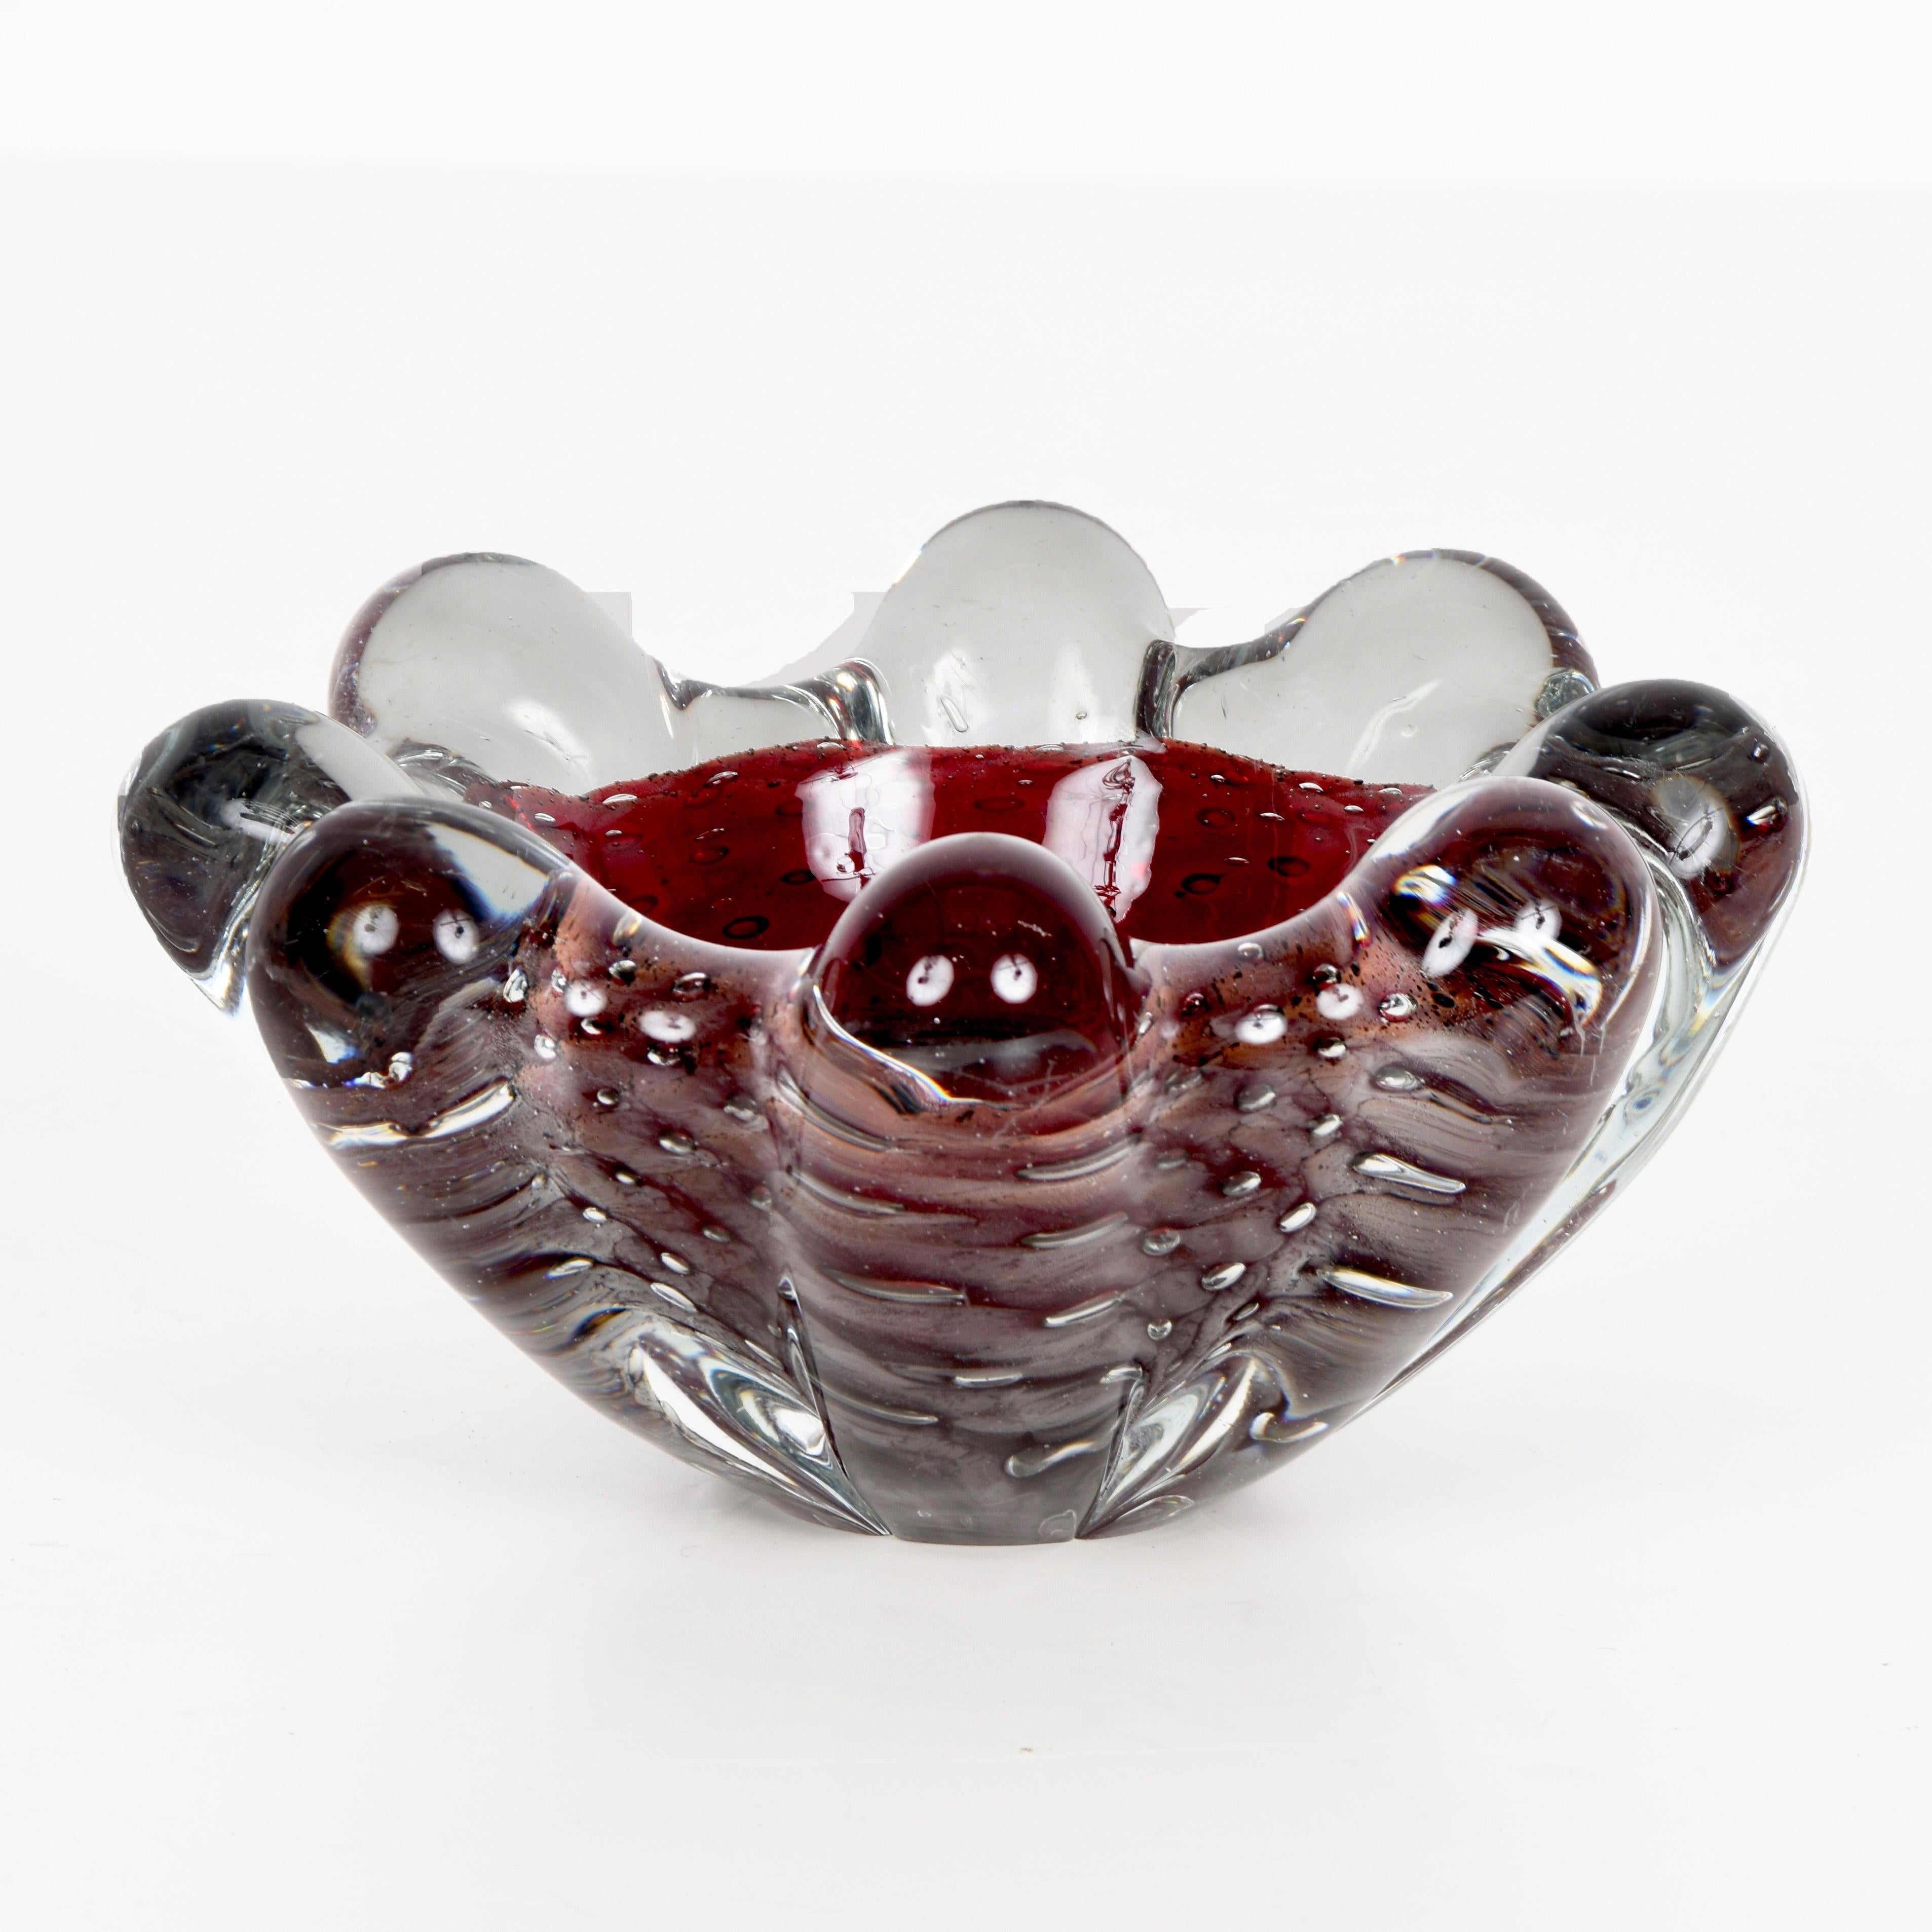 Amazing midcentury crystal and purple air-bubbled glass bowl. This wonderful item was designed in Murano, Italy, by Seguso Vetri d'Arte during 1950s.

This blown glass bowls from Seguso is truly a delight with its purple colour and richness of